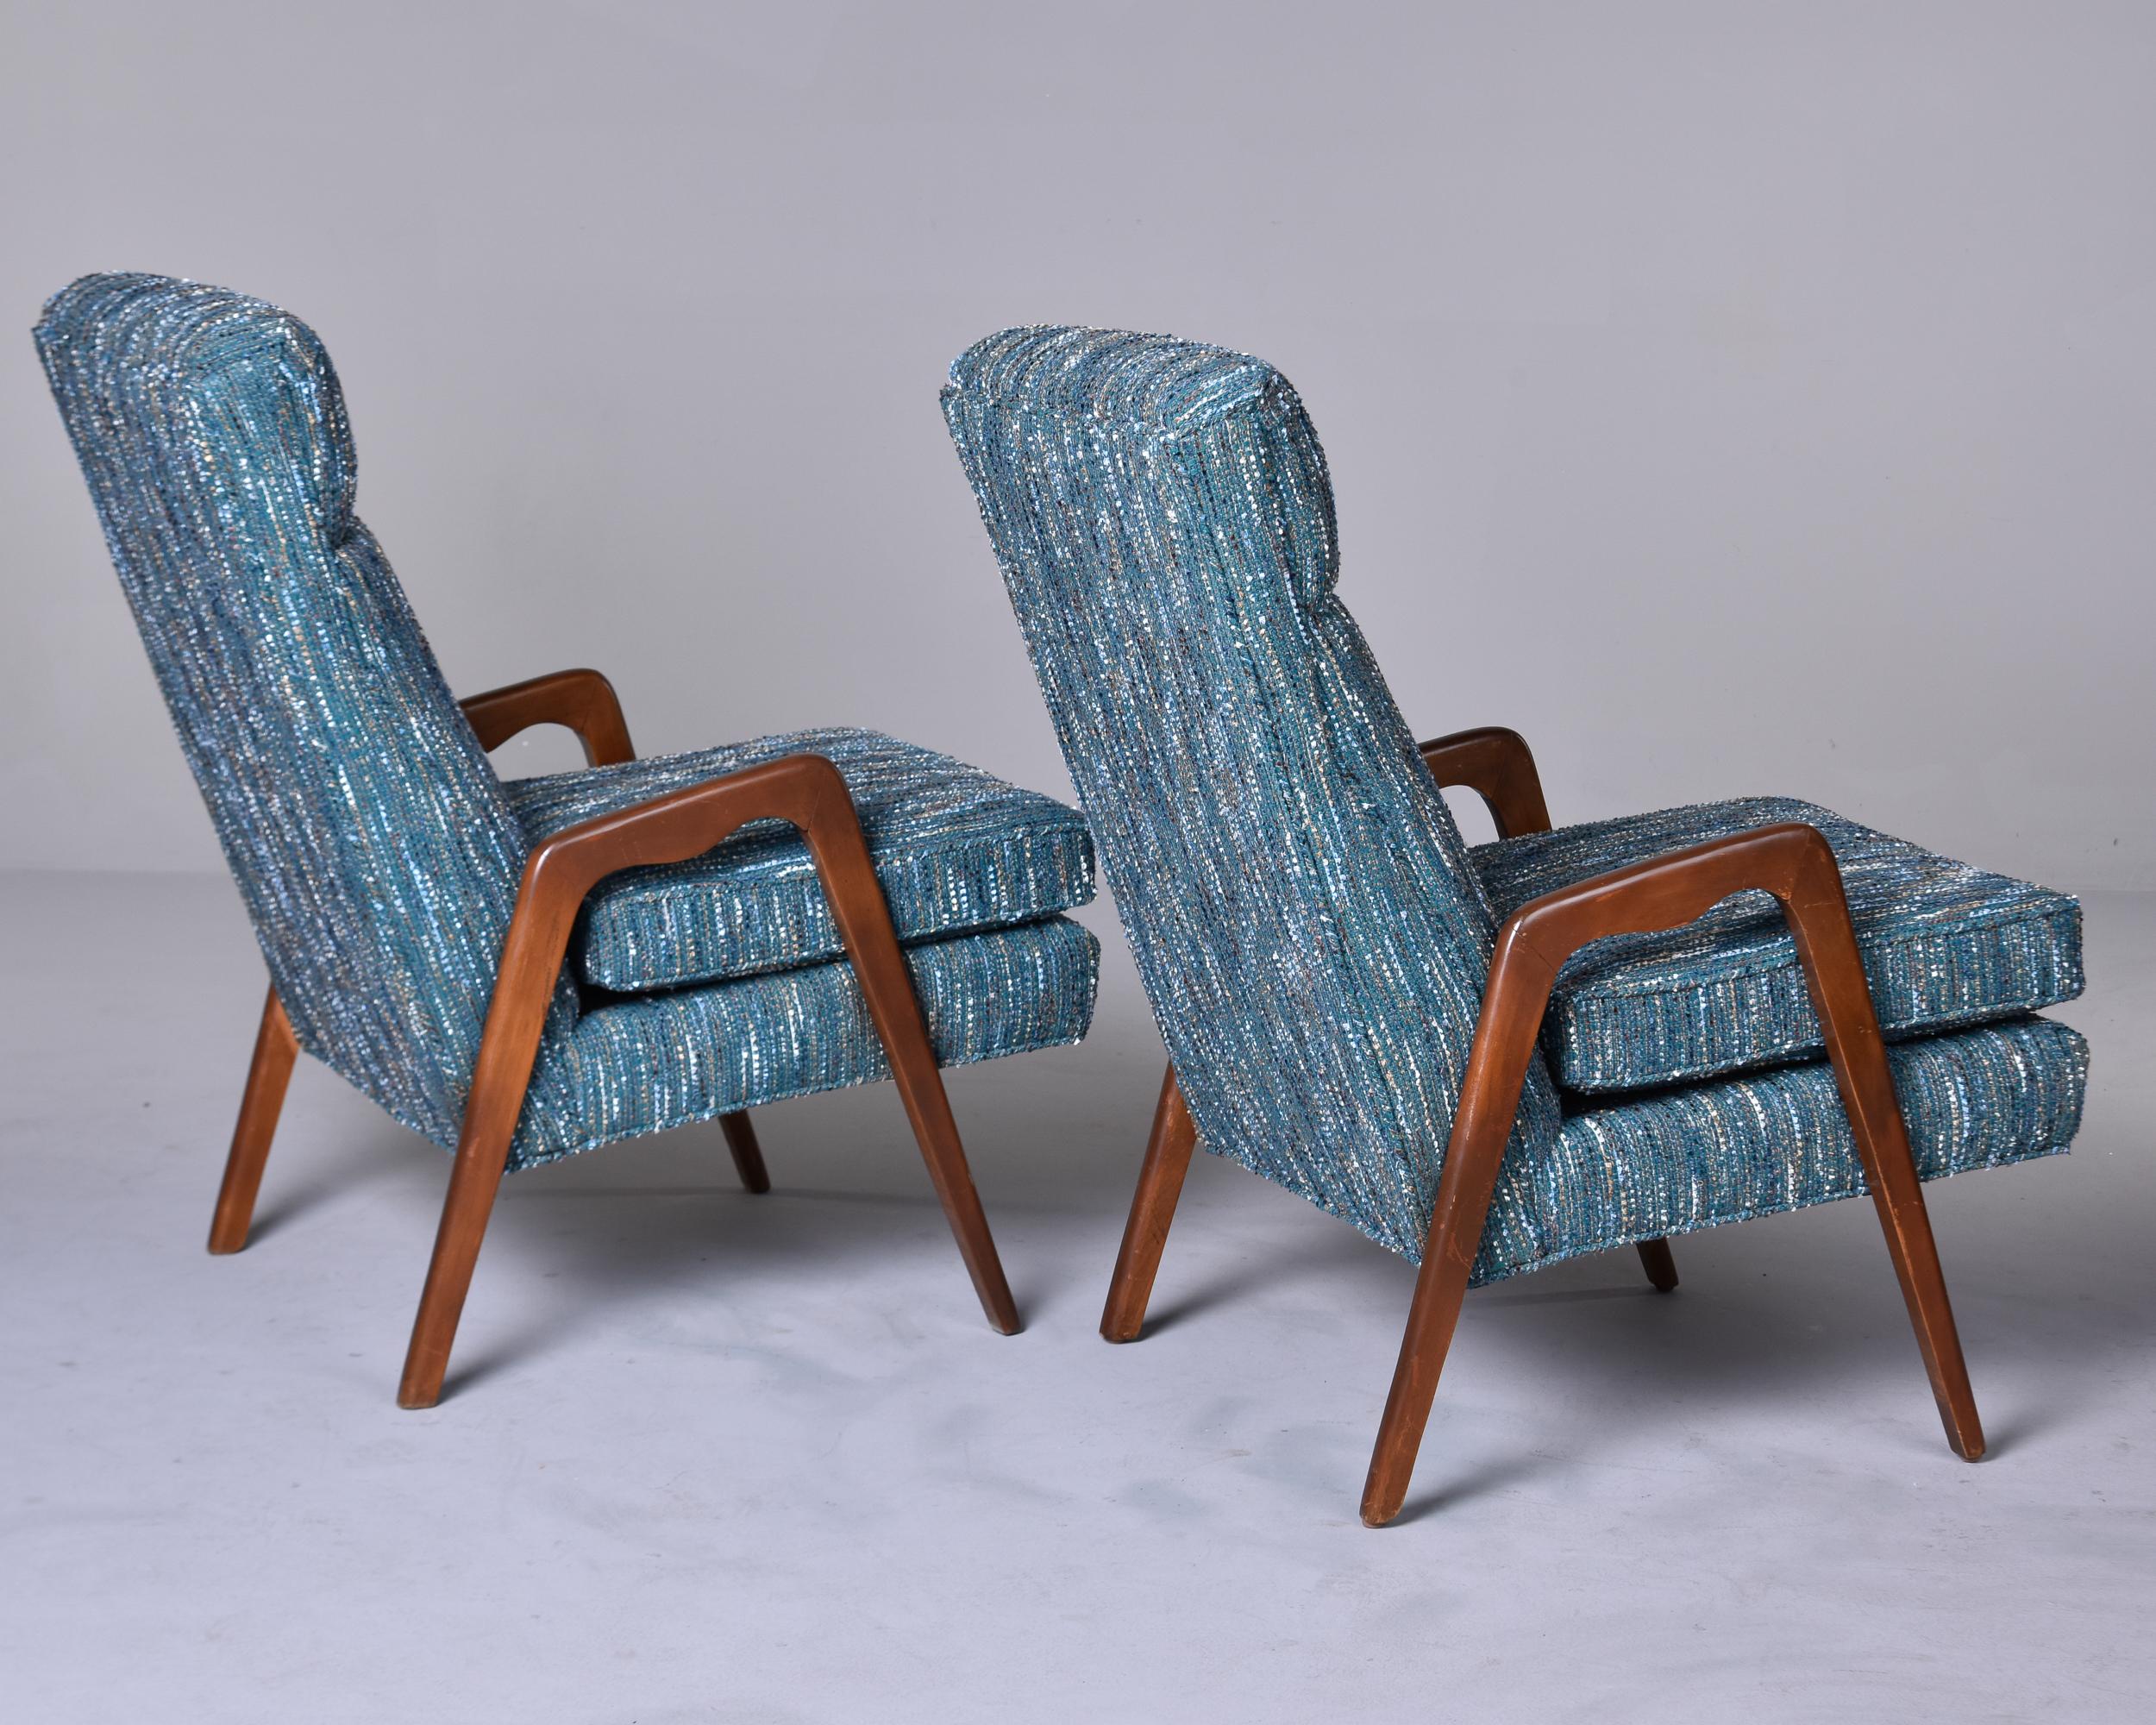 Pair of Mid-Century Italian Chairs with New Teal Tweed Upholstery For Sale 4